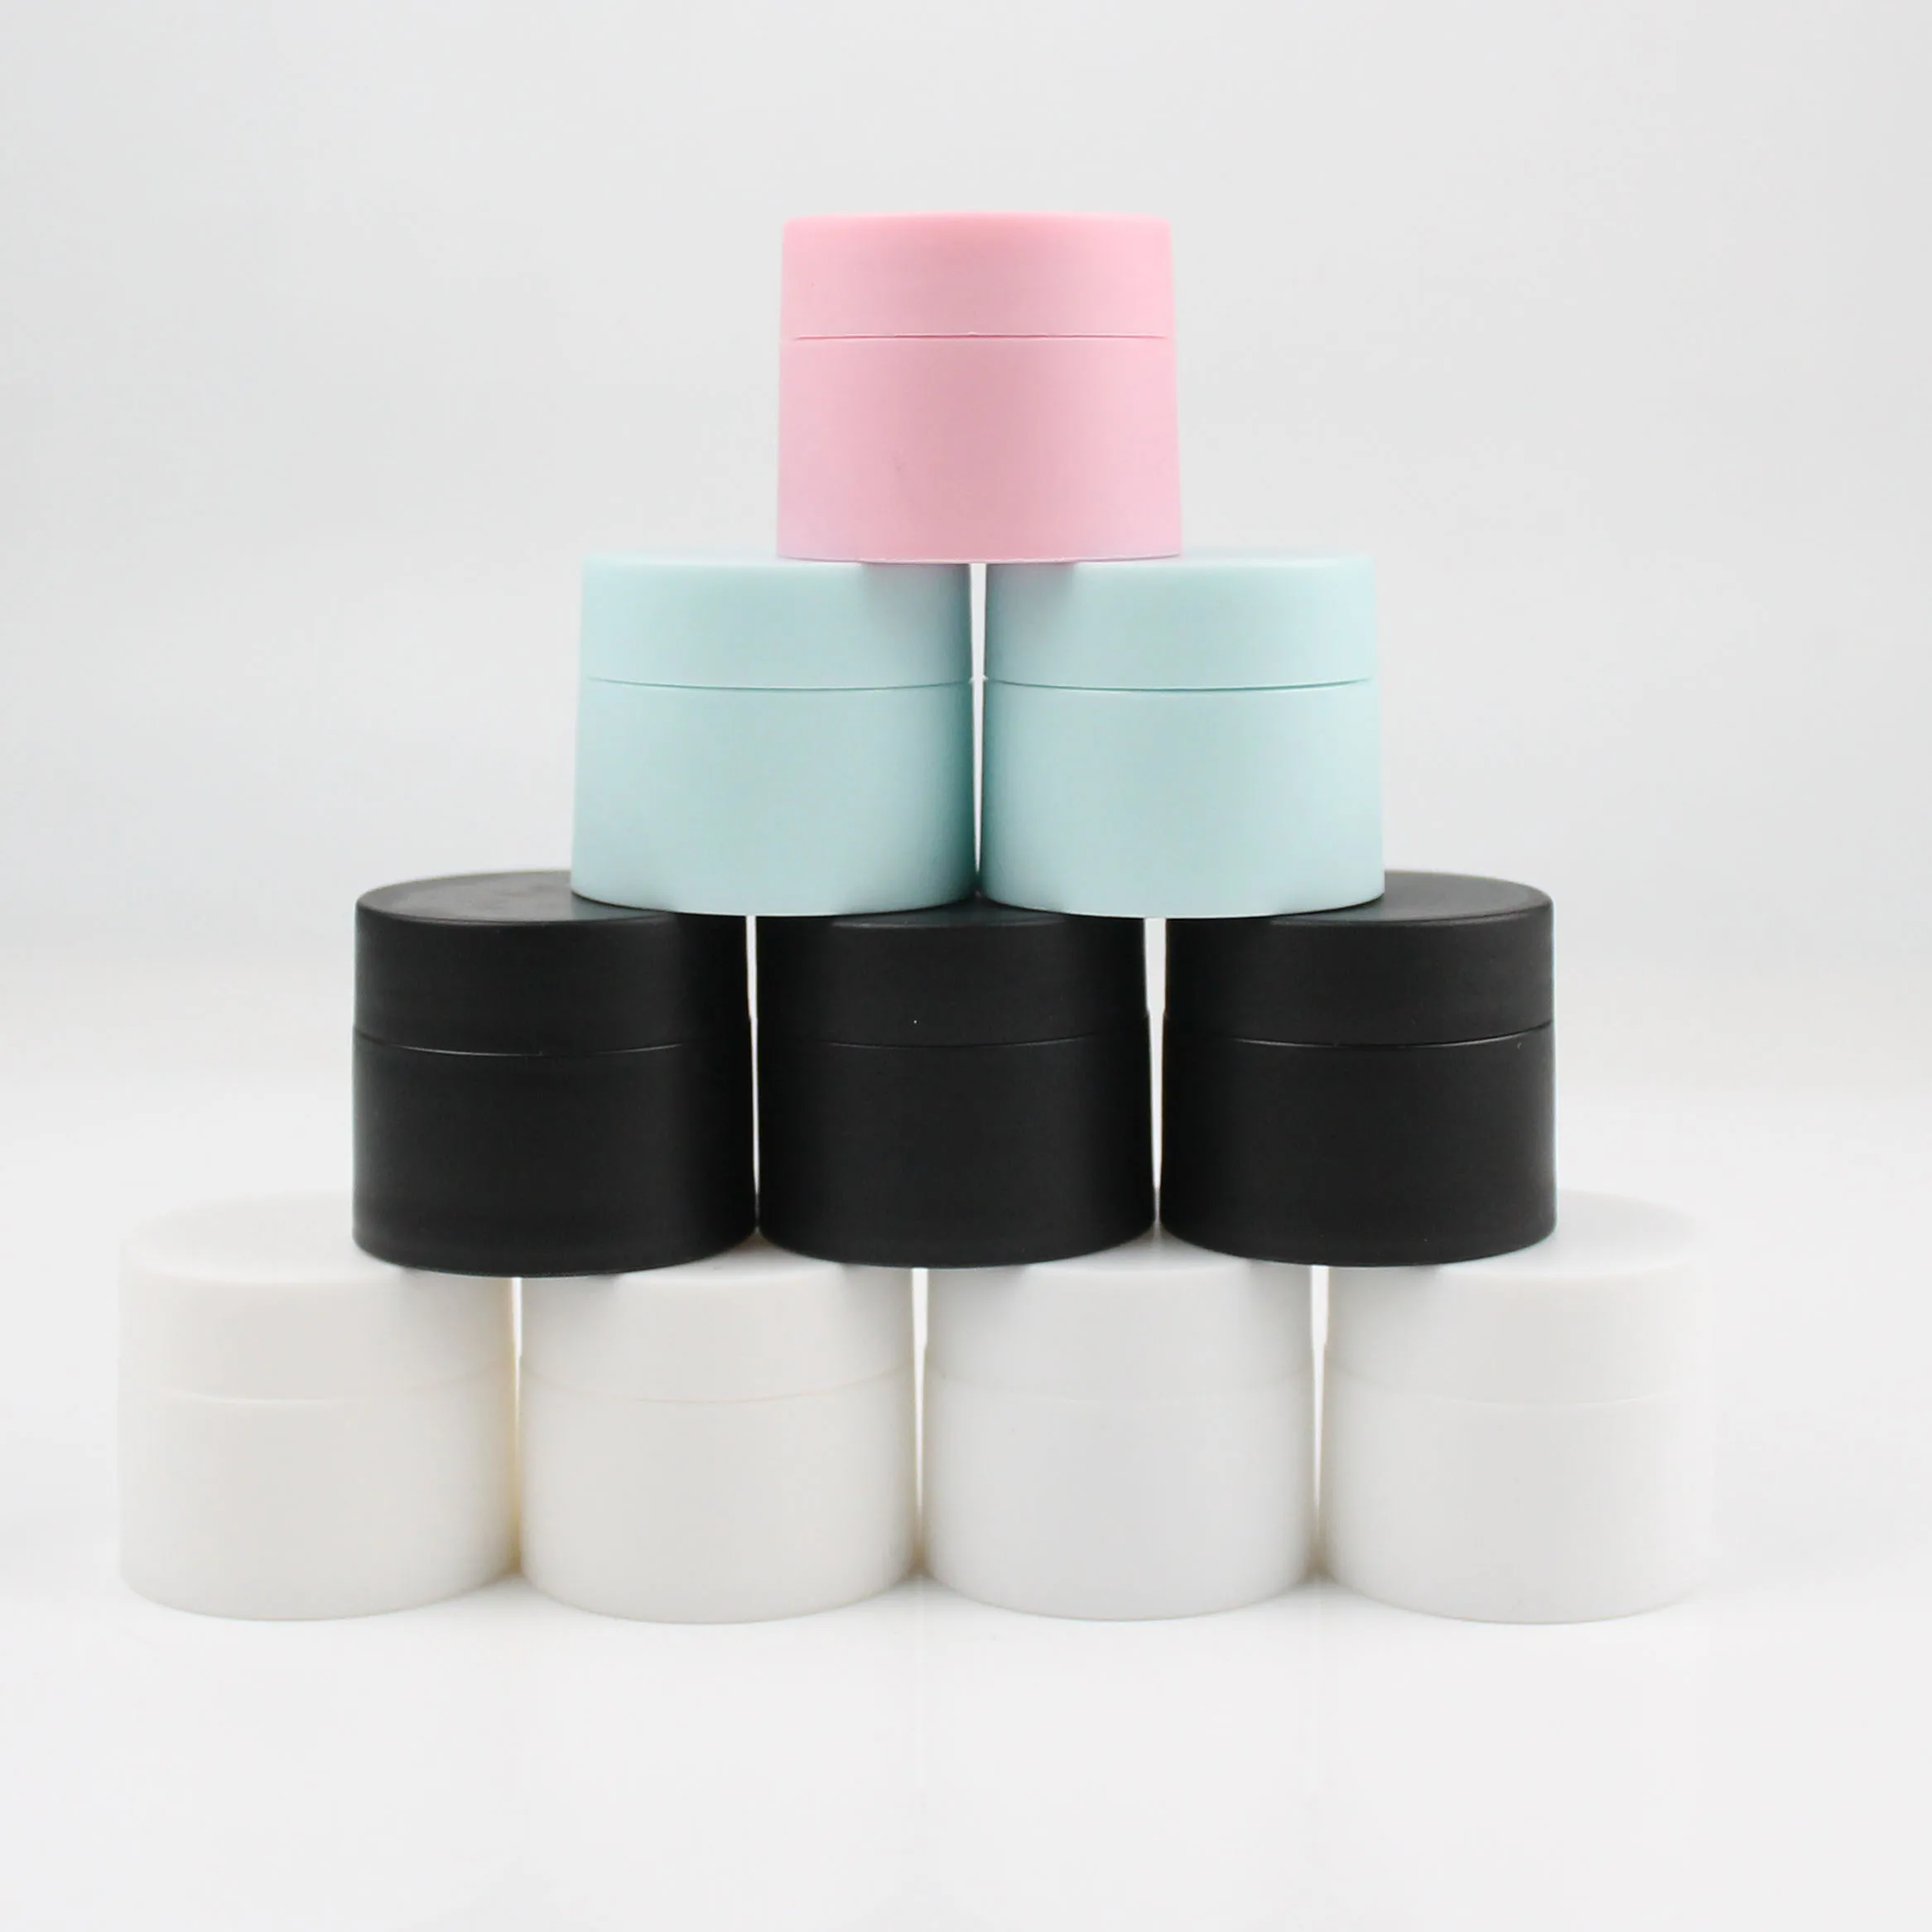 

30Pcs/Sets 3g 5g Portable Empty Tight Waist Container Refillable Bottle Travel Face Cream Jar Cosmetic Plastic Box with Lid